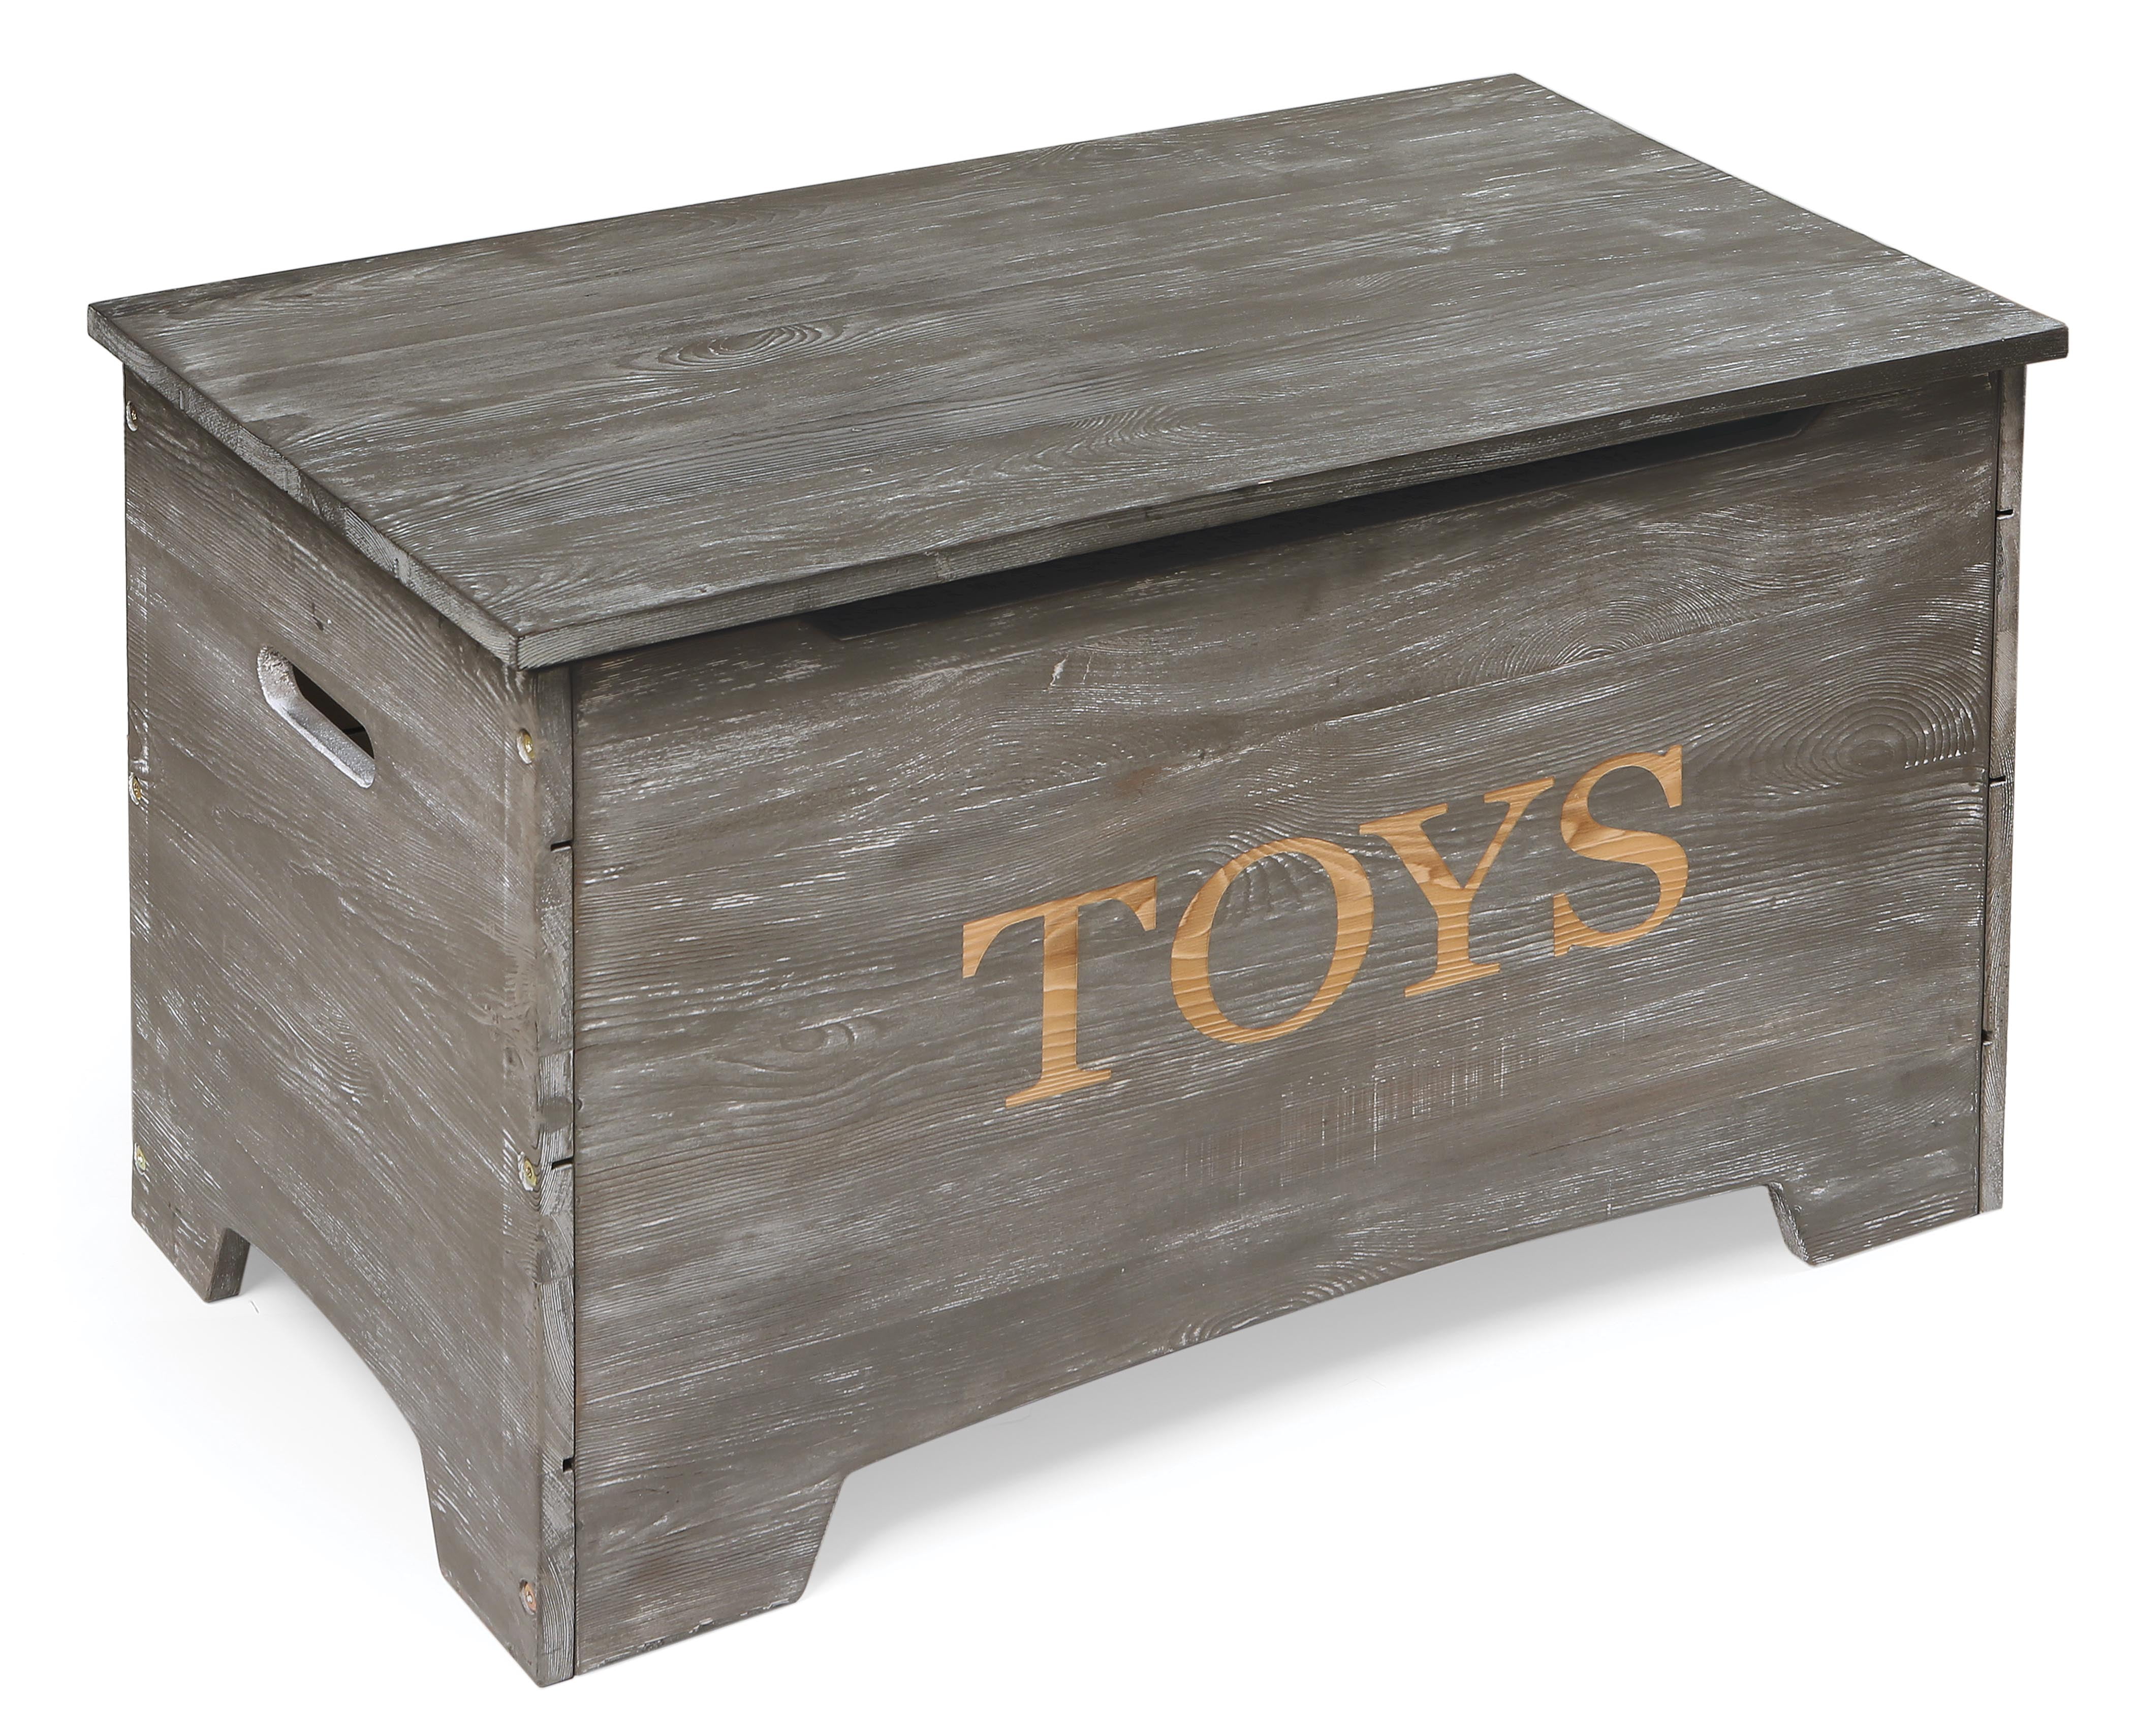 closetmaid kidspace chalkboard toy chest